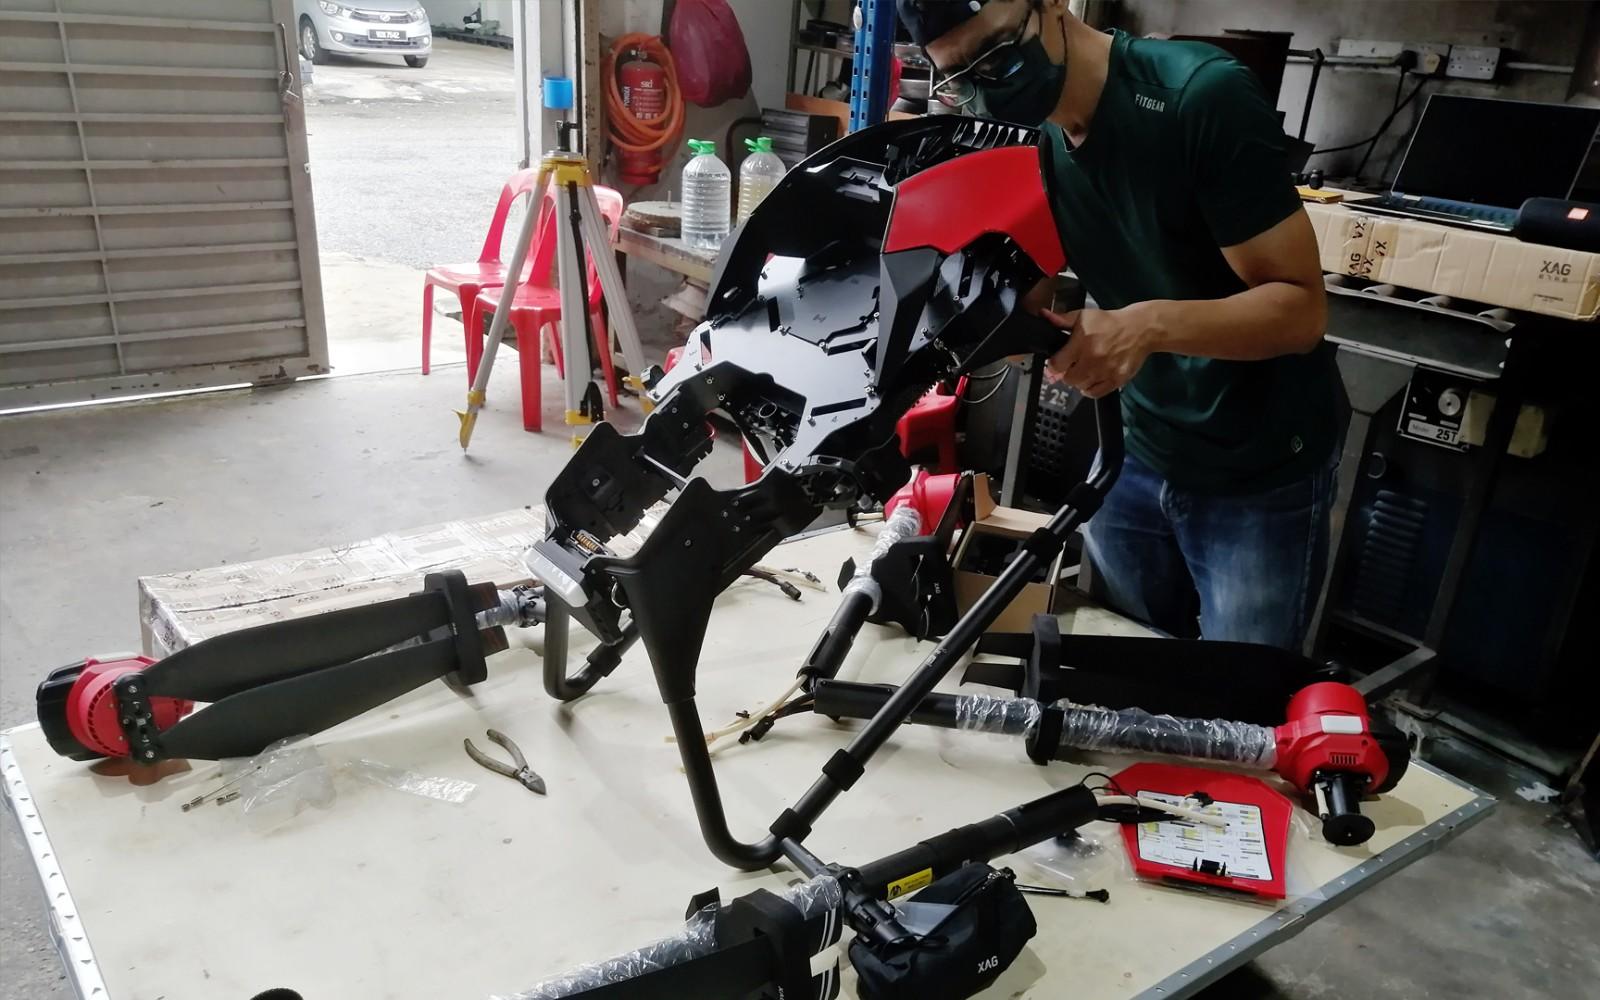 Remove four arms and propellers, let’s give a careful body check to the new arrival drone before the first take off. (Malaysia, source: Alliance Agrotech Sdn Bhd)